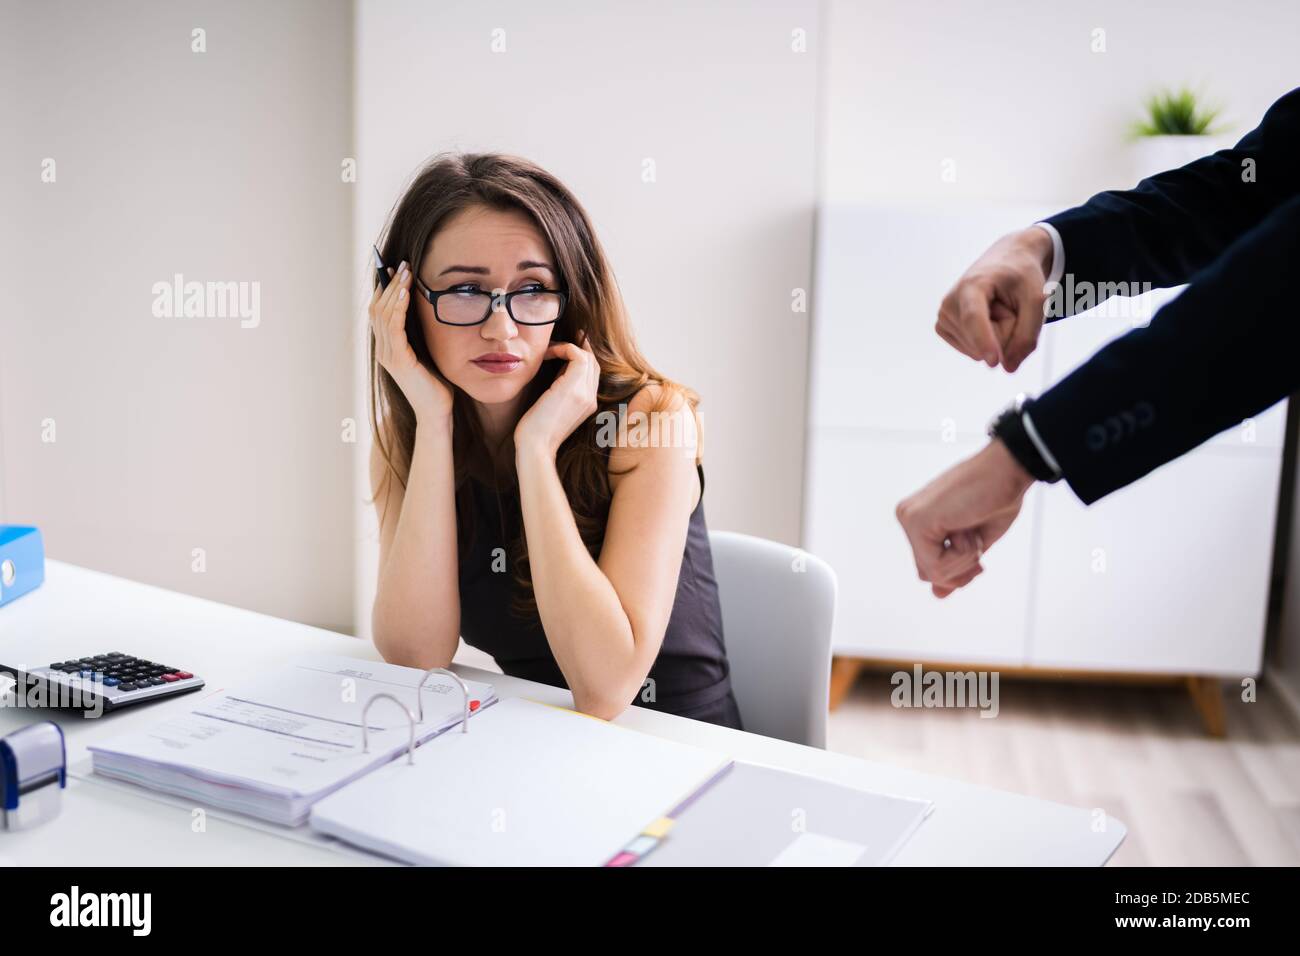 Angry Boss Pointing On Wrist Watch While Colleague Checking Invoice Stock Photo